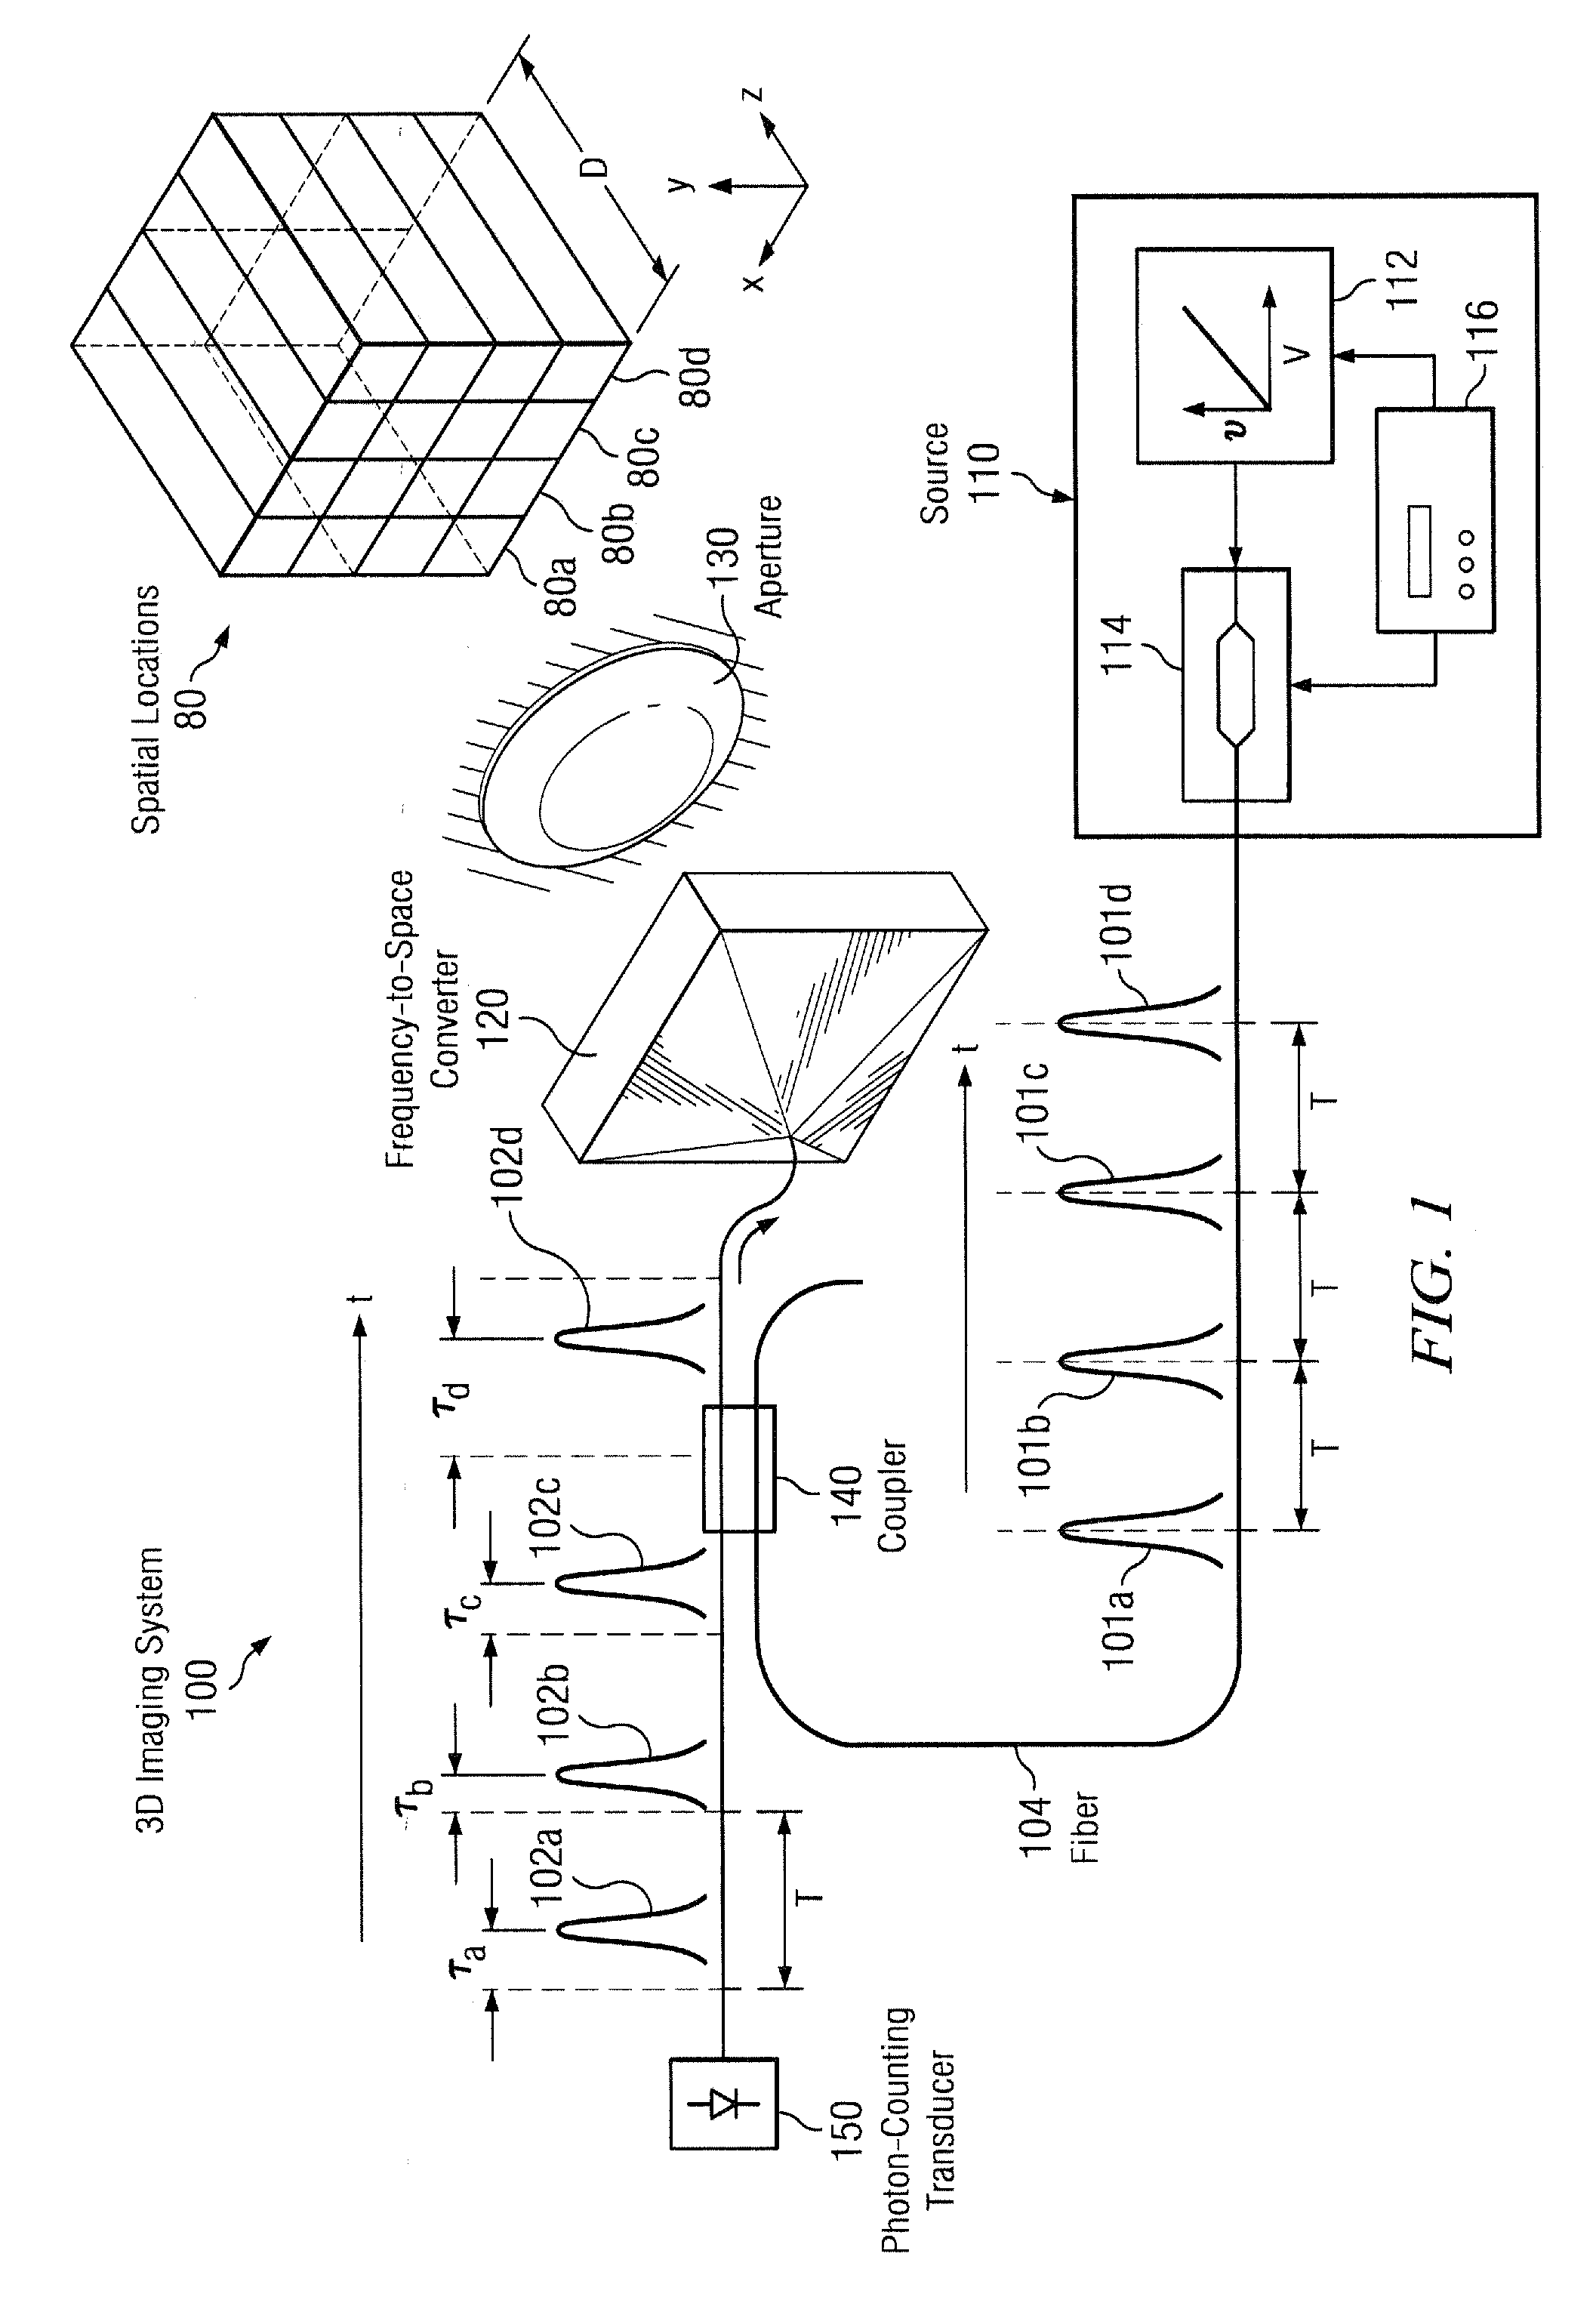 Single-transducer, three-dimensional laser imaging system and method